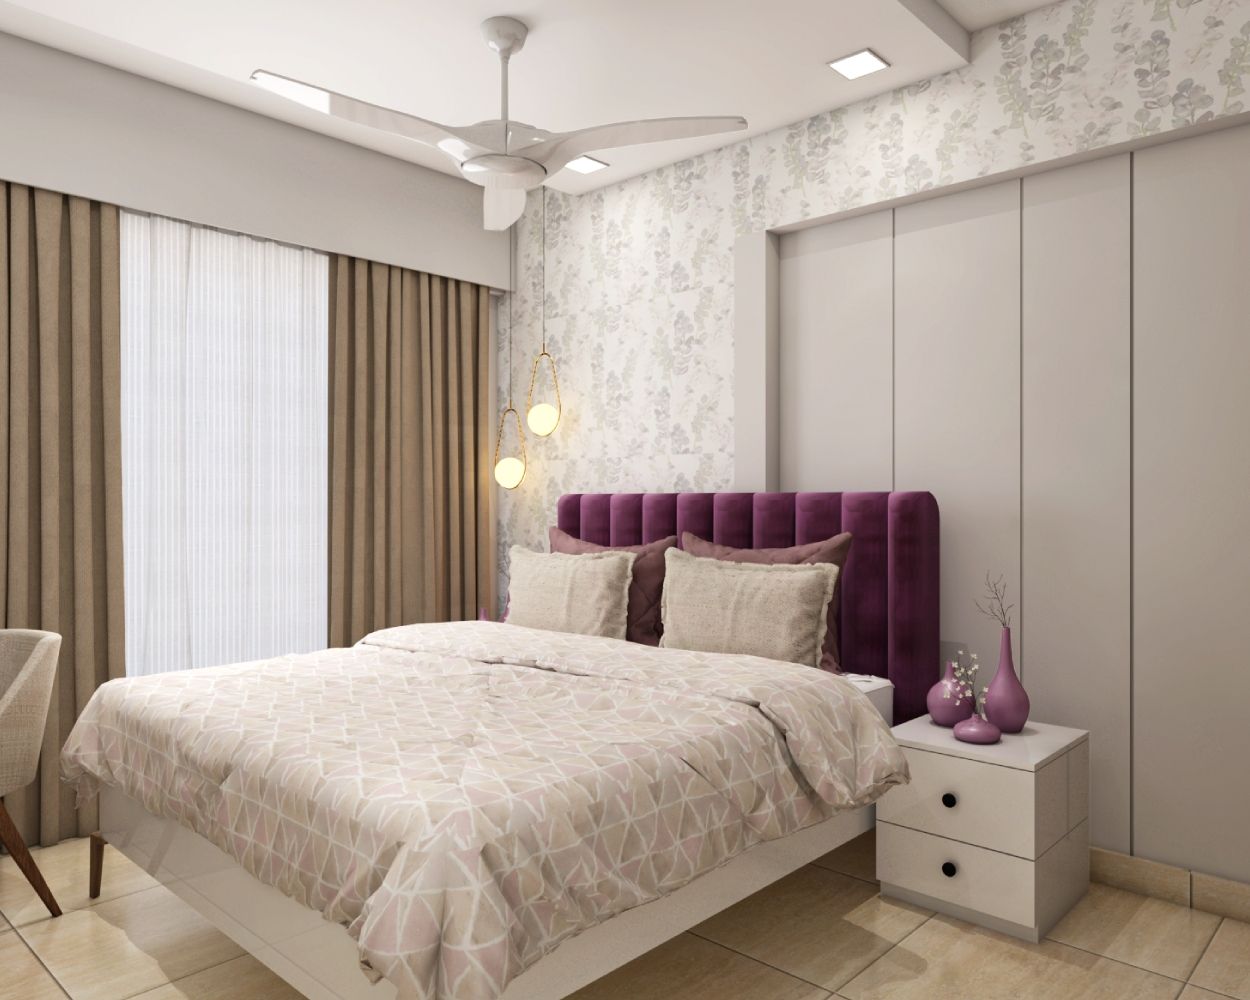 Modern Guest Room Design With Purple Tufted Headboard And Leafy Wallpaper